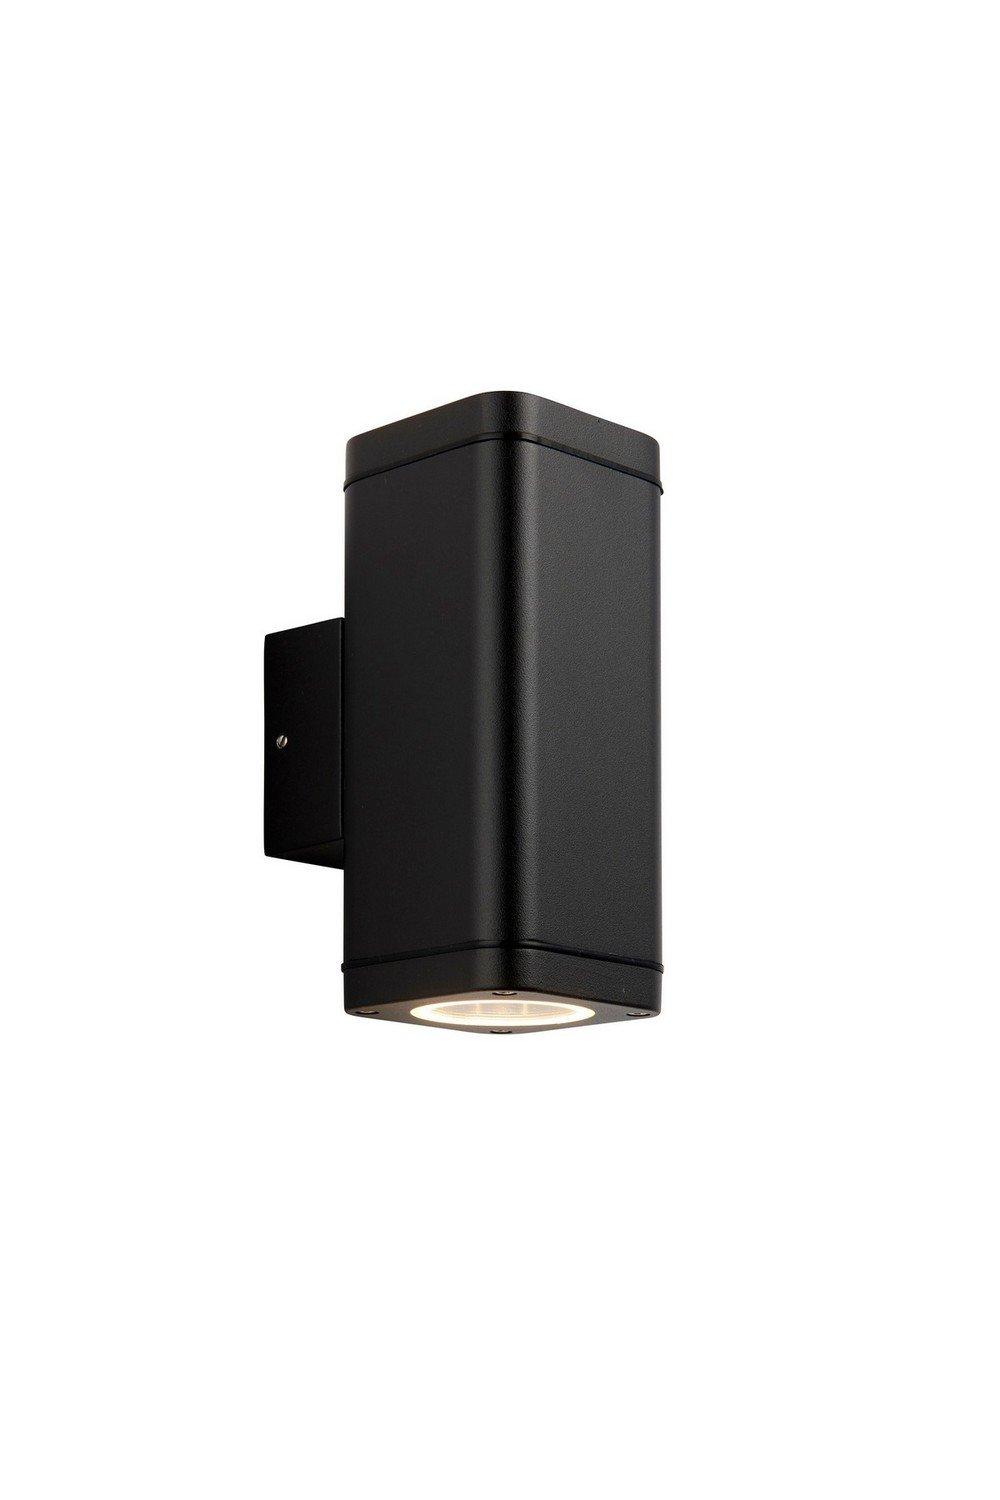 Milton Modern Architectural Outdoor Up Down Wall Light Textured Black Finish IP44